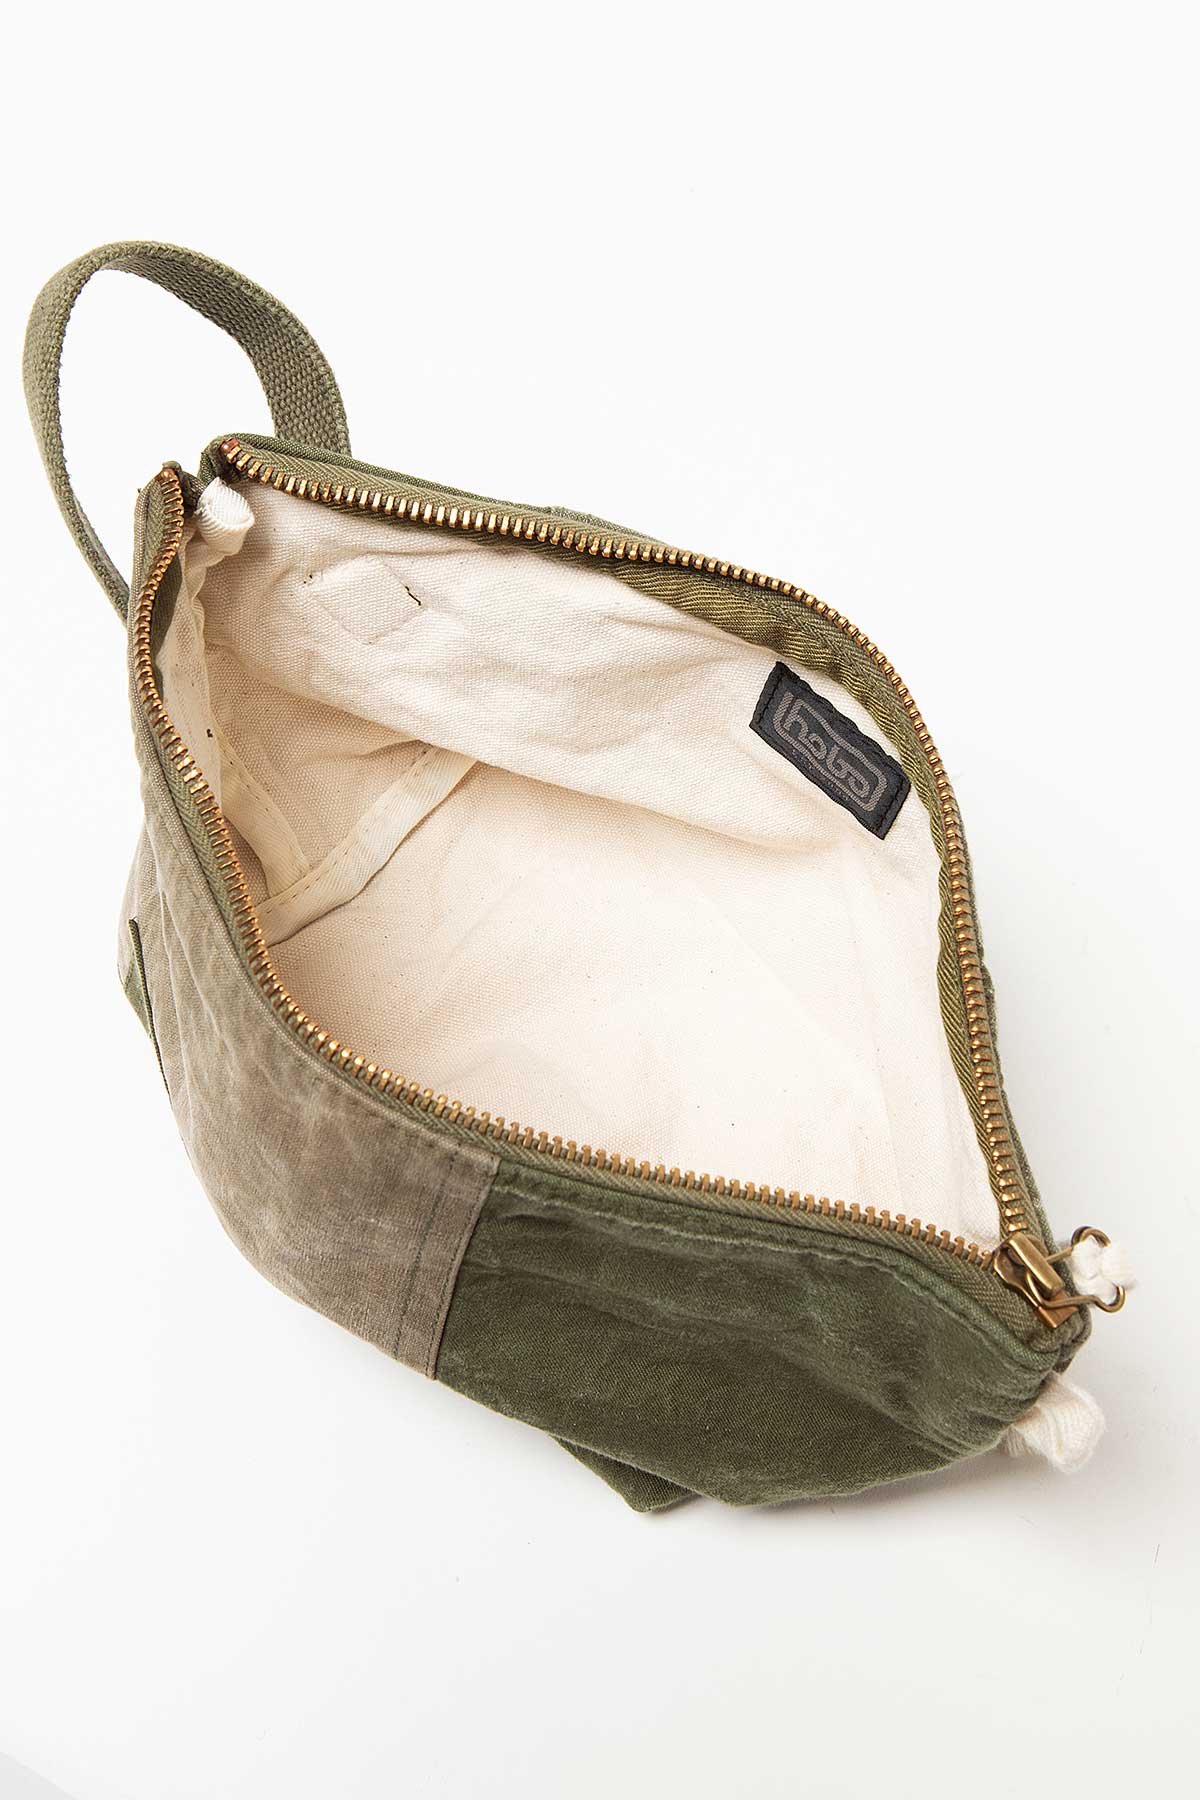 TOUR POUCH UPCYCLED US ARMY CLOTH | hobo